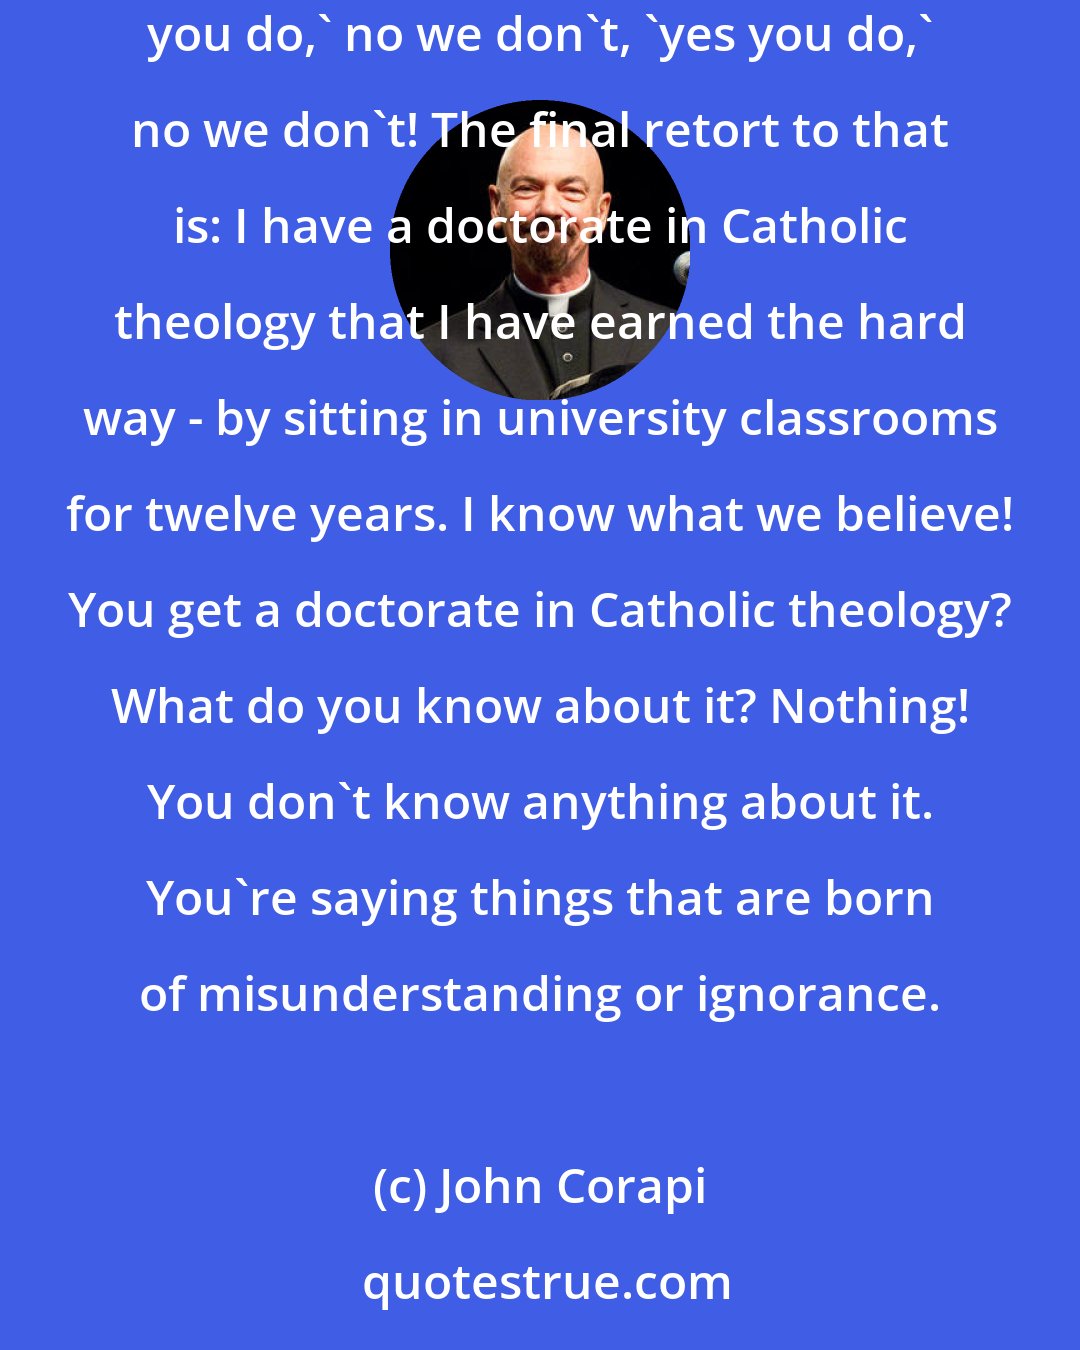 John Corapi: More than once I've had discussions with persons who say things based on a misunderstanding. 'Oh you Catholics worship images.' No we don't, 'yes you do,' no we don't, 'yes you do,' no we don't! The final retort to that is: I have a doctorate in Catholic theology that I have earned the hard way - by sitting in university classrooms for twelve years. I know what we believe! You get a doctorate in Catholic theology? What do you know about it? Nothing! You don't know anything about it. You're saying things that are born of misunderstanding or ignorance.